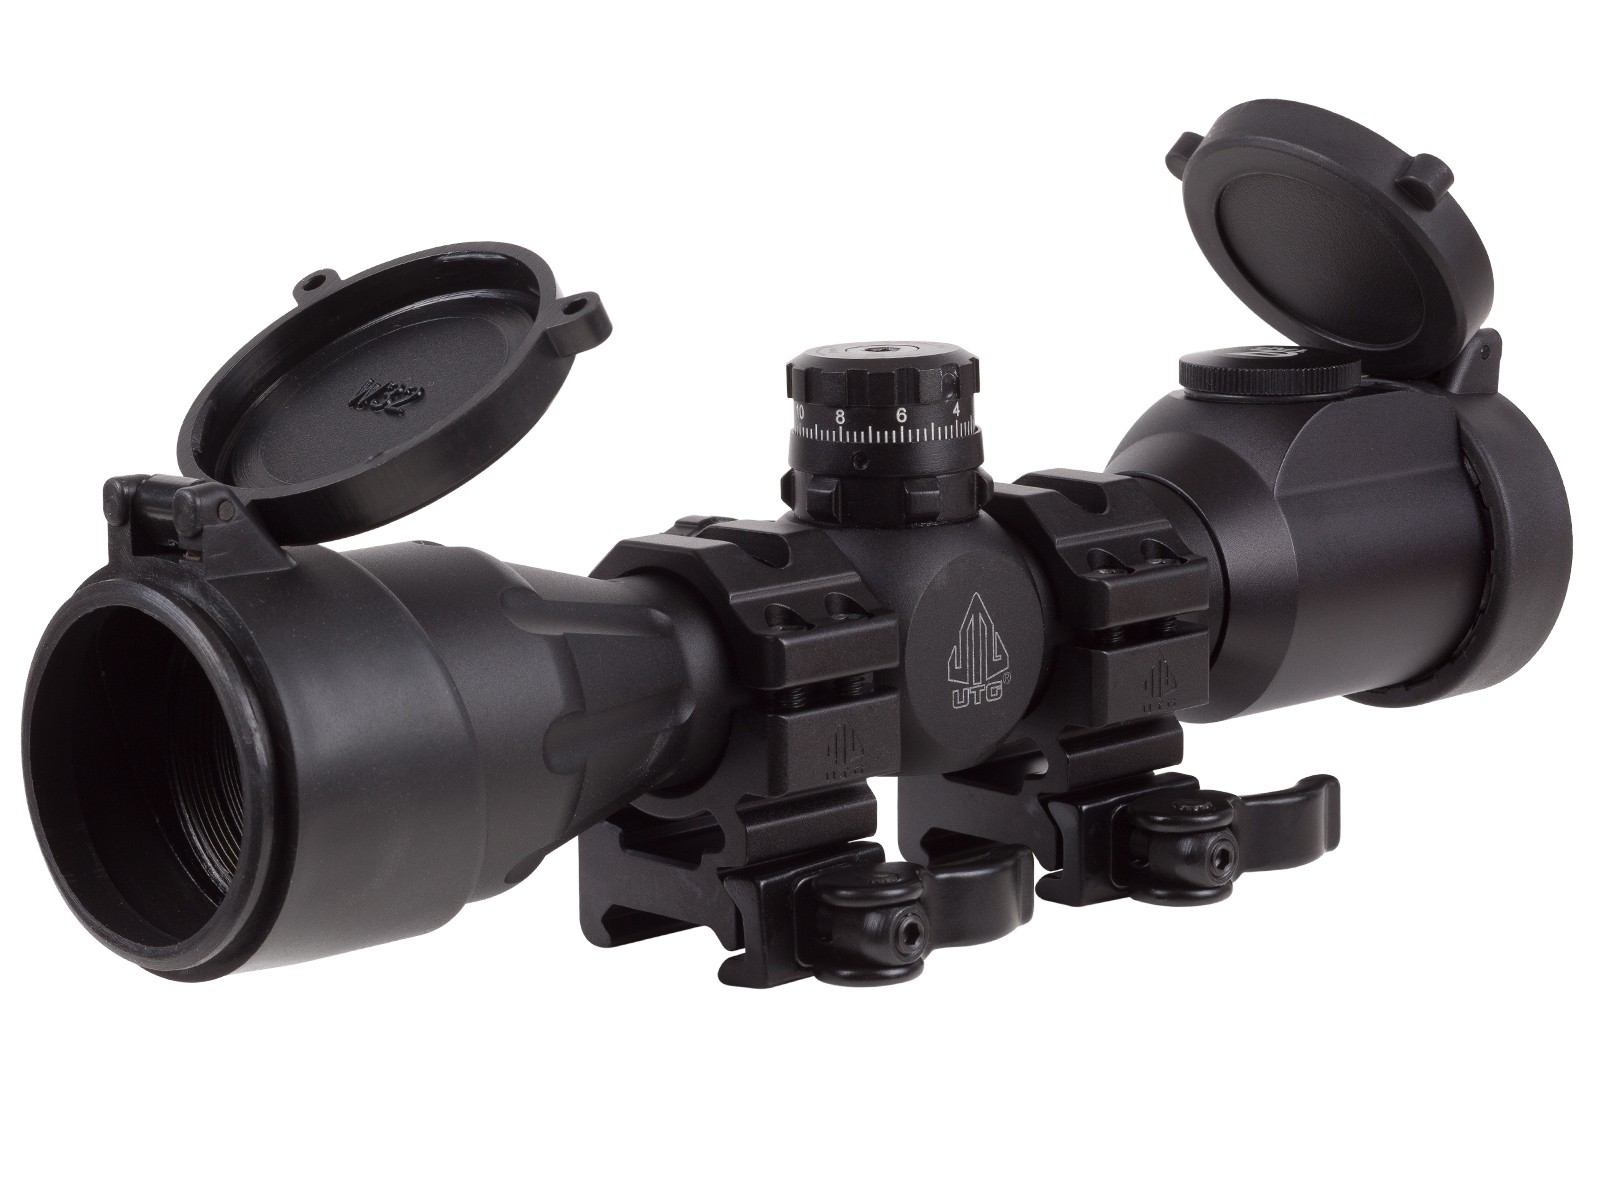 Scope 4. UTG 4x32 mil-Dot. Leapers 4x32 3 YDS. Коллиматор Leapers UTG 5th Gen ITA 1x32 4", SCP-ds3840w, точка 4moa. 4x scope.